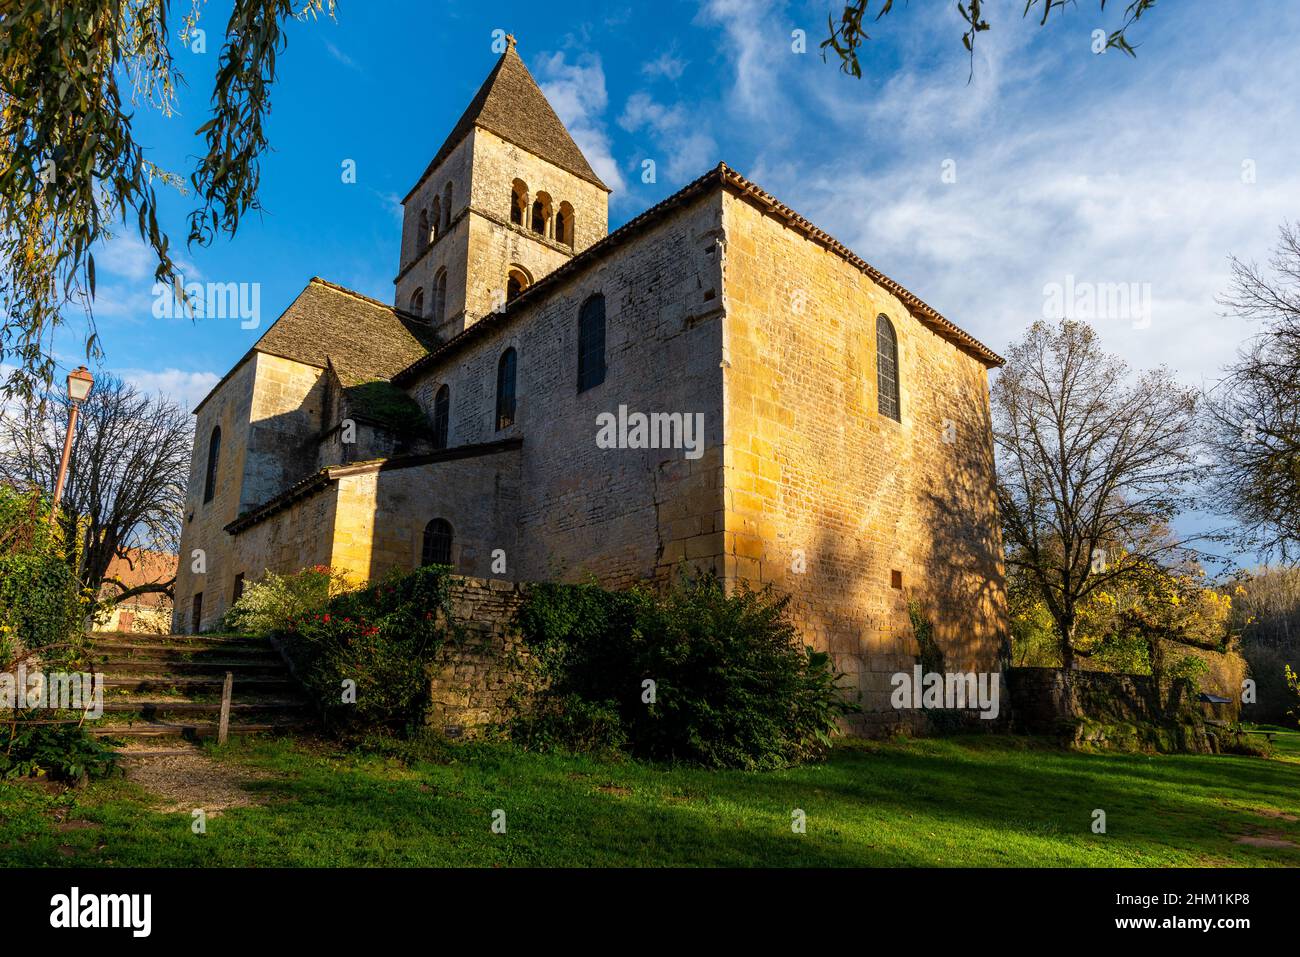 Yellow stone Roman church of Saint-Leon-sur-Vezere in Perigord, France. Taken on a sunny autumn afternoon with no people. Stock Photo